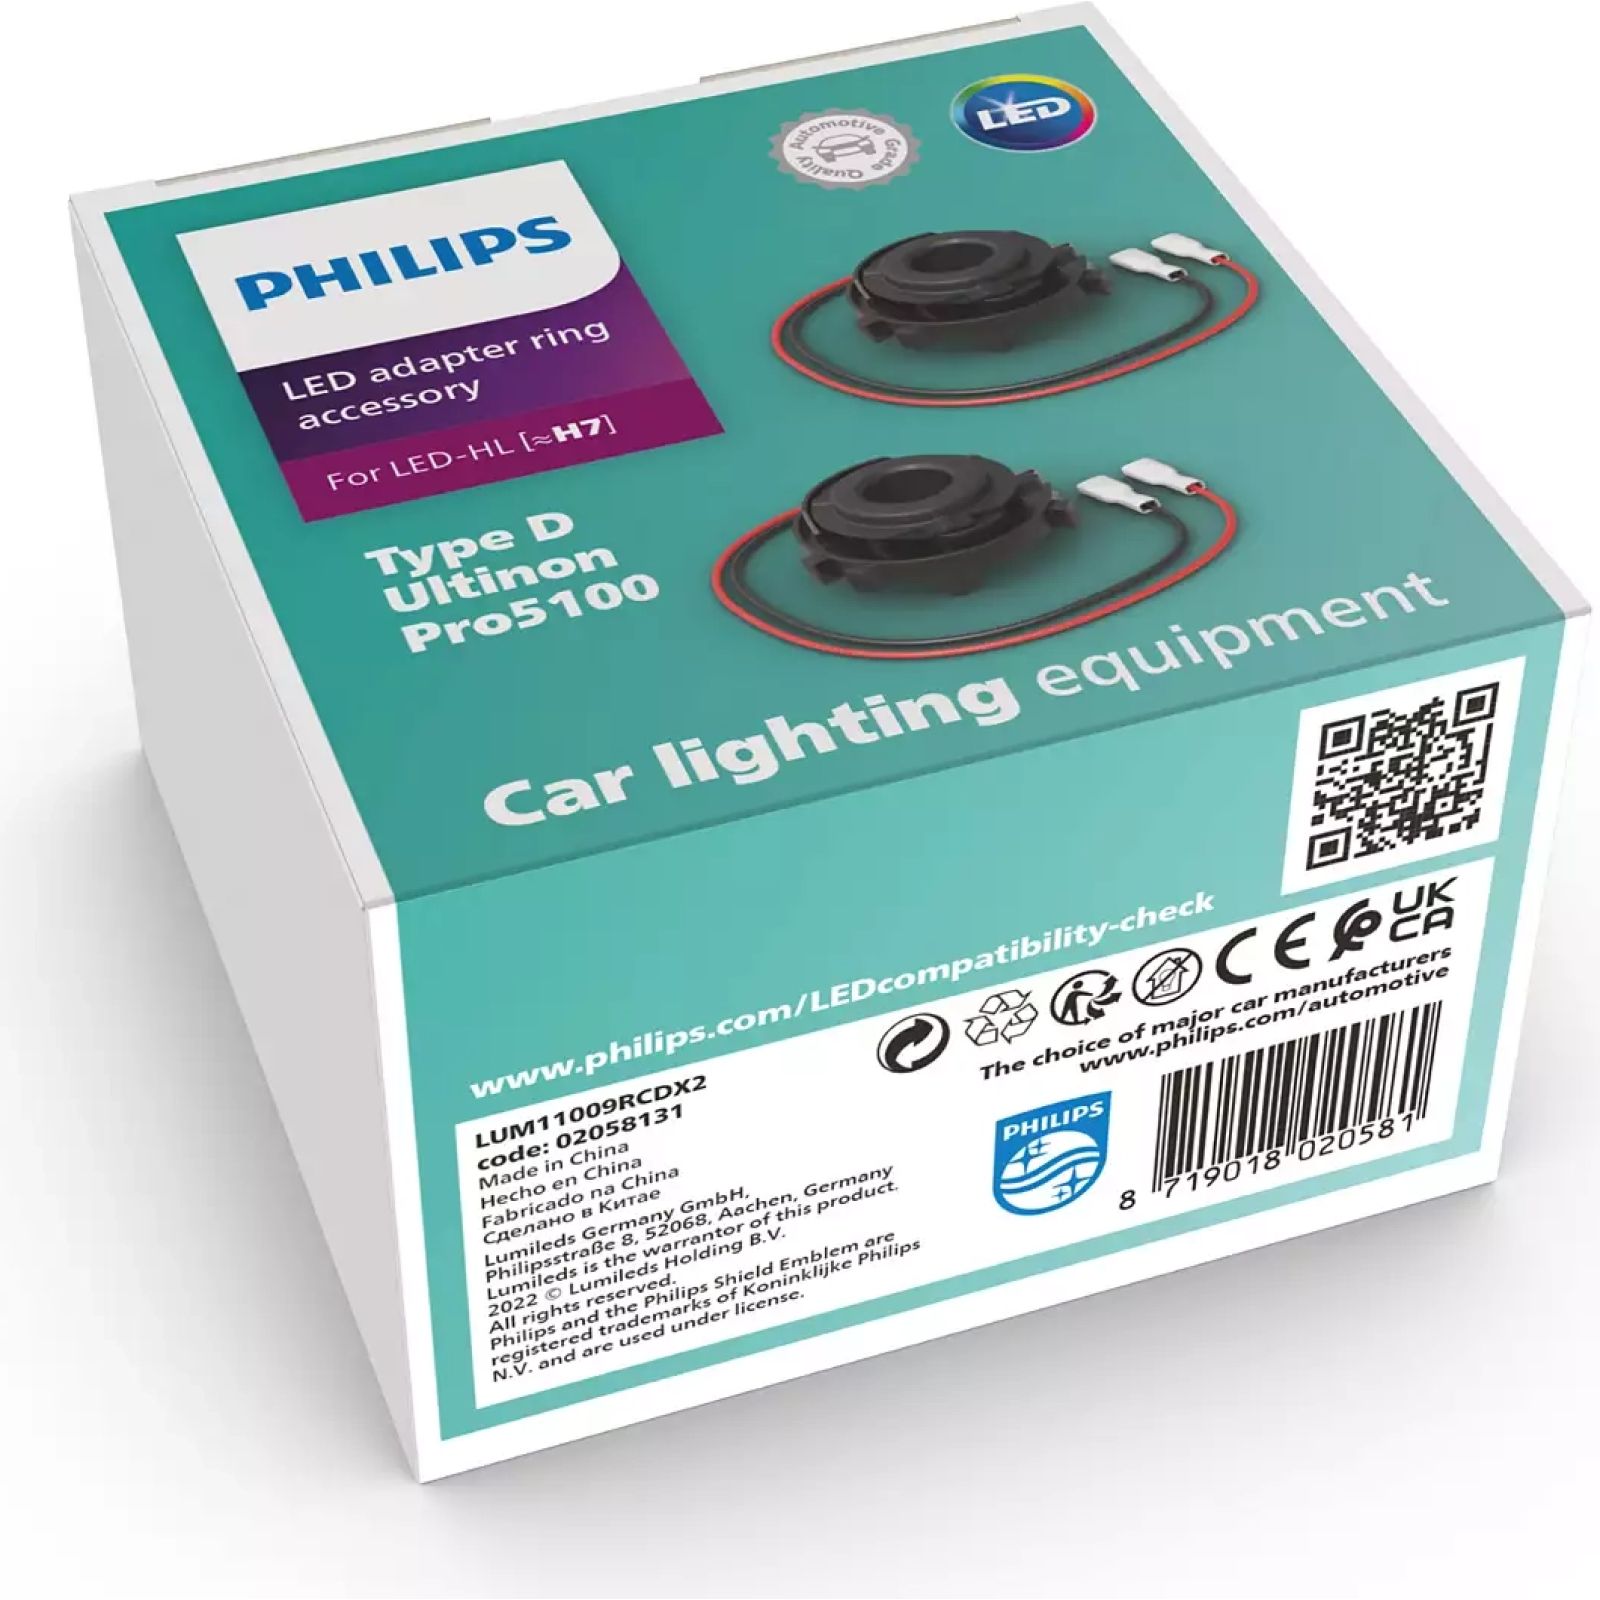 Philips LED Connector rings [~H7] Type D - Zubehör für LED Ultinon Pro 5100  2 St